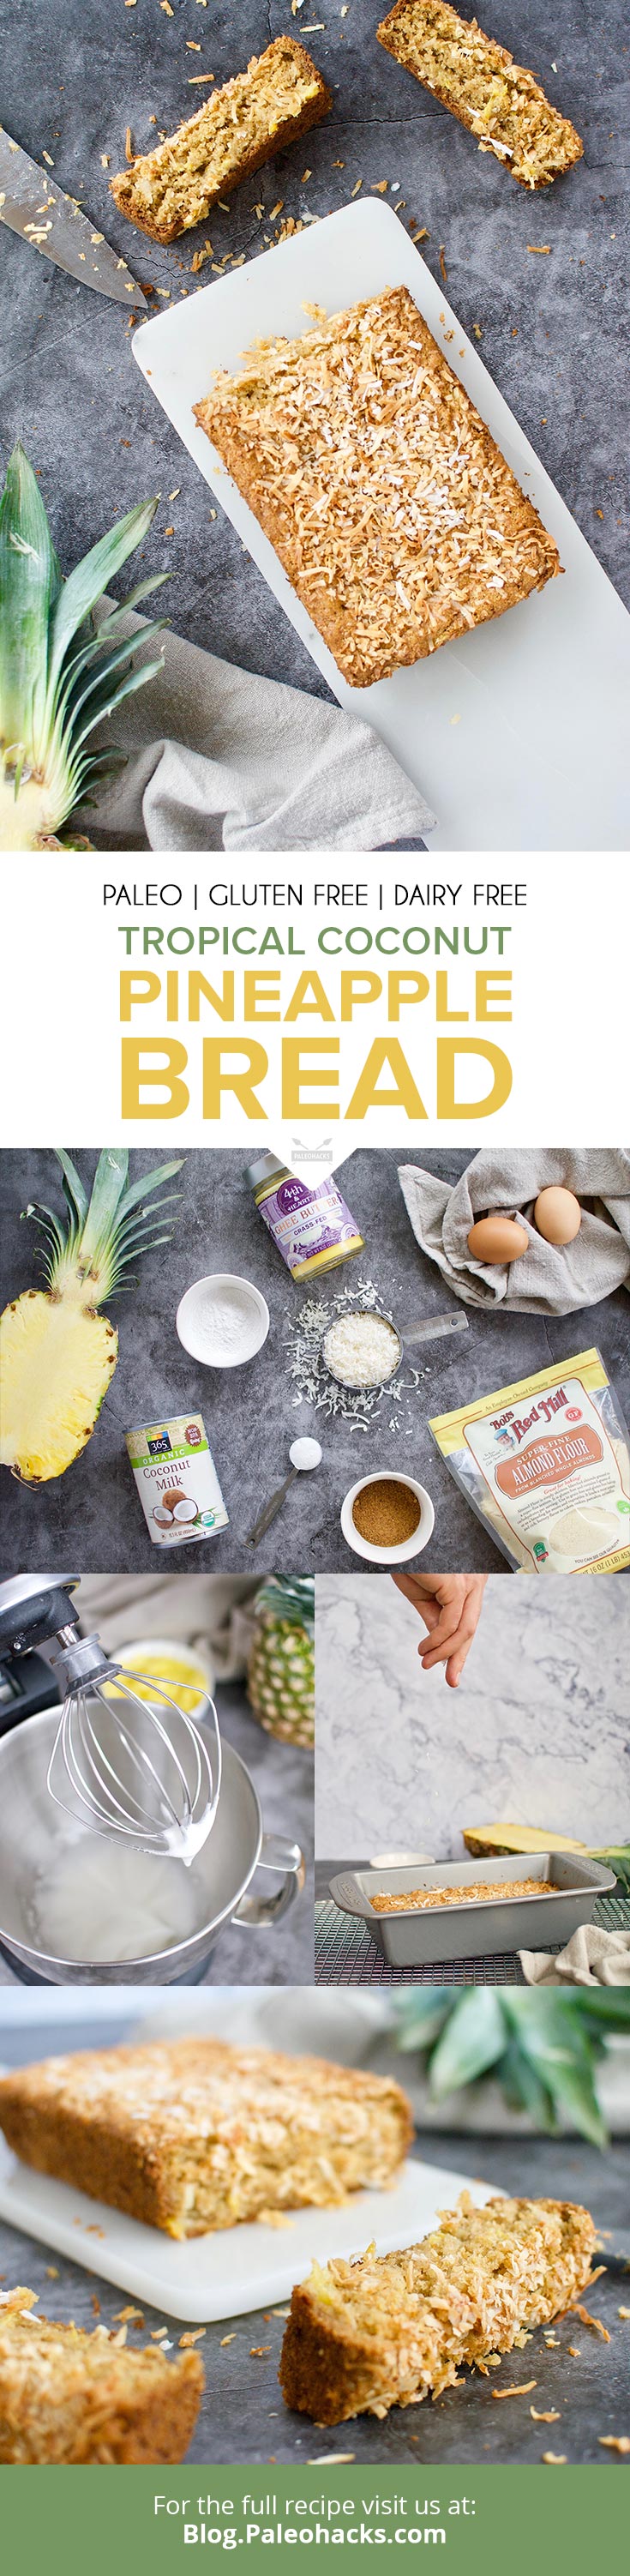 Whisk yourself to the tropics with an infusion of freshly baked bread and sweet piña colada flavoring. Enjoy for breakfast or dessert!